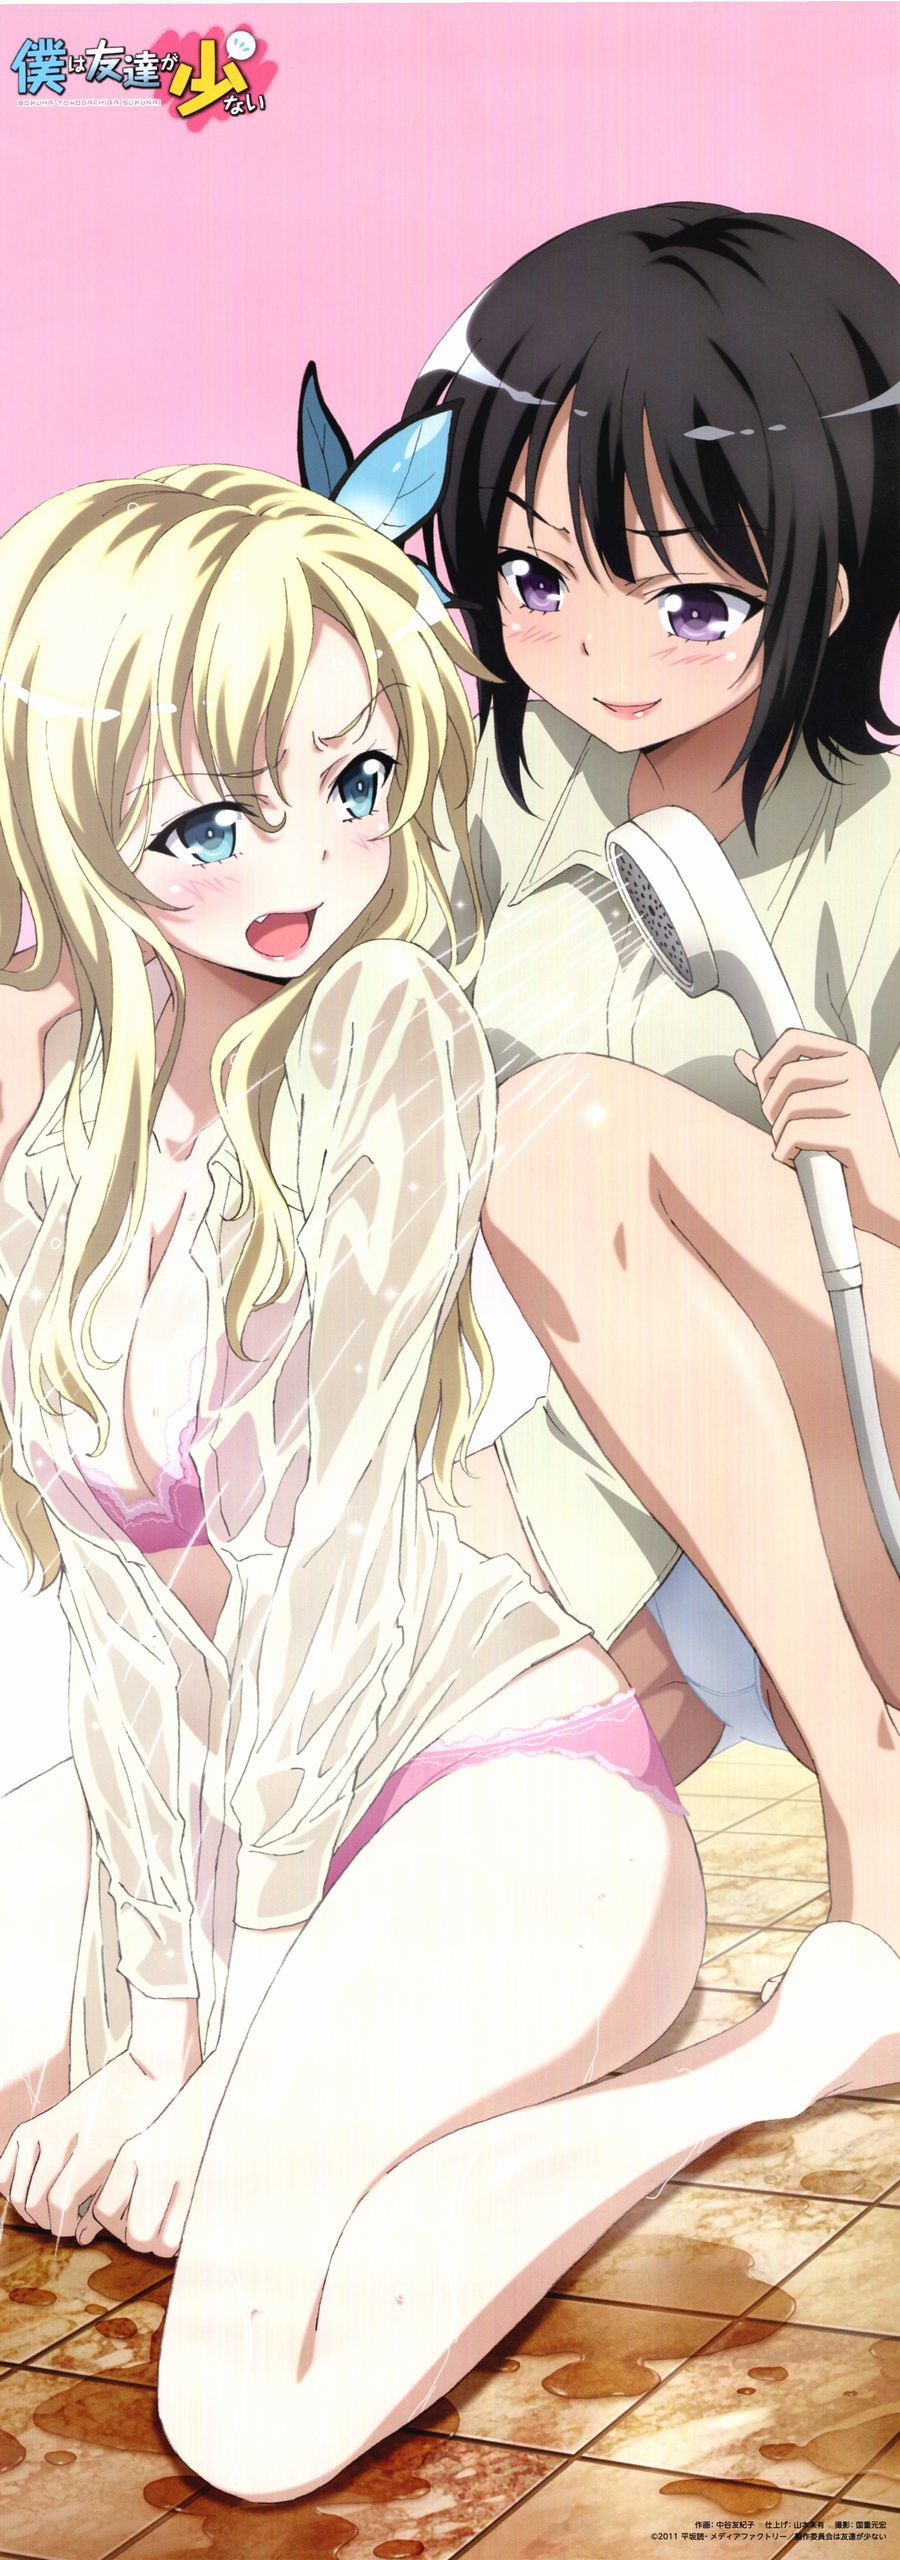 "Haganai" of meat together images to admire the Kashiwazaki Sena's dirty little schoolgirl body part2 15